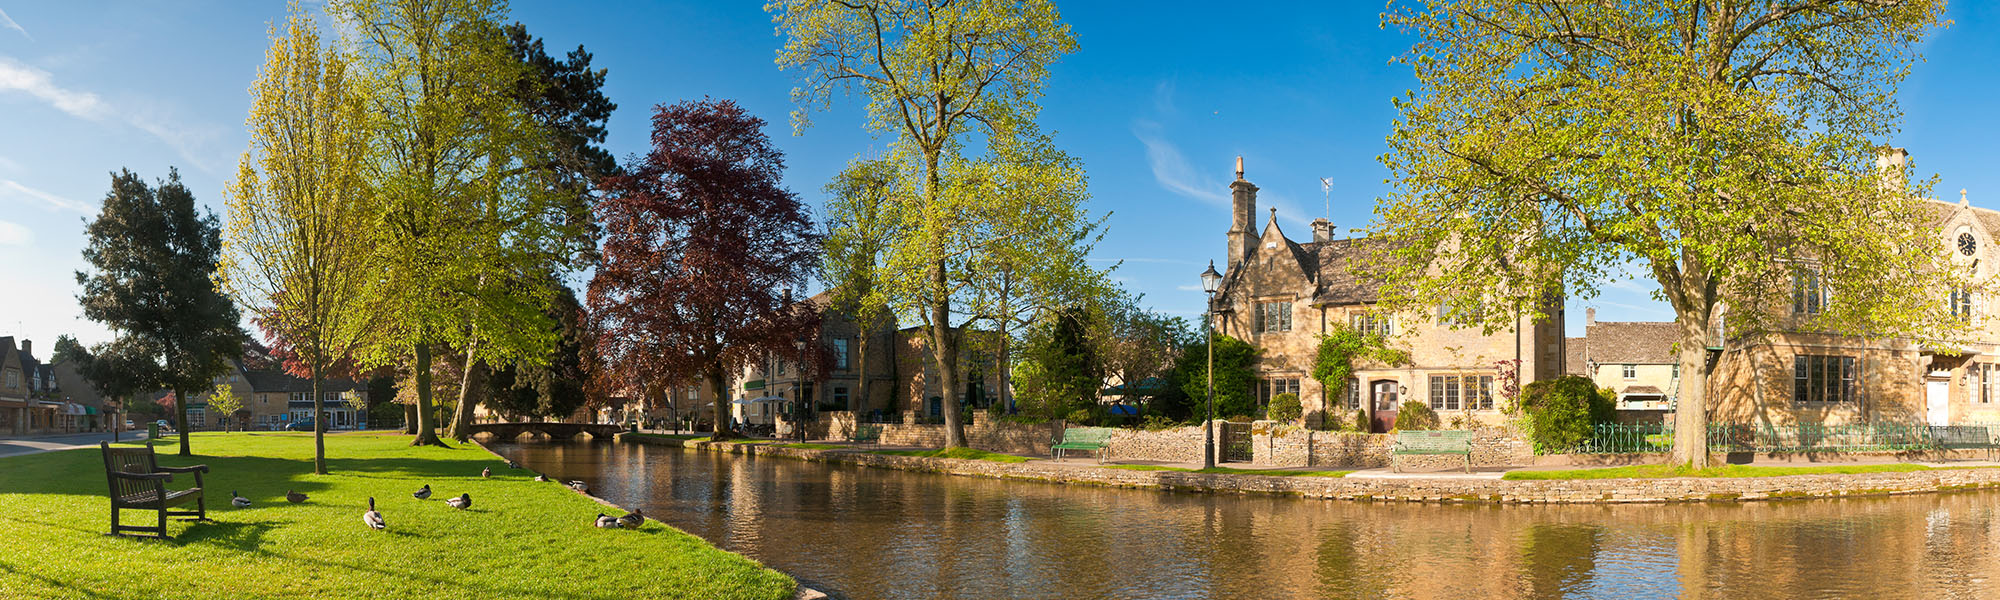 tourhub | Just Go Holidays | Steaming through the Cotswolds & Cruising the River Avon 